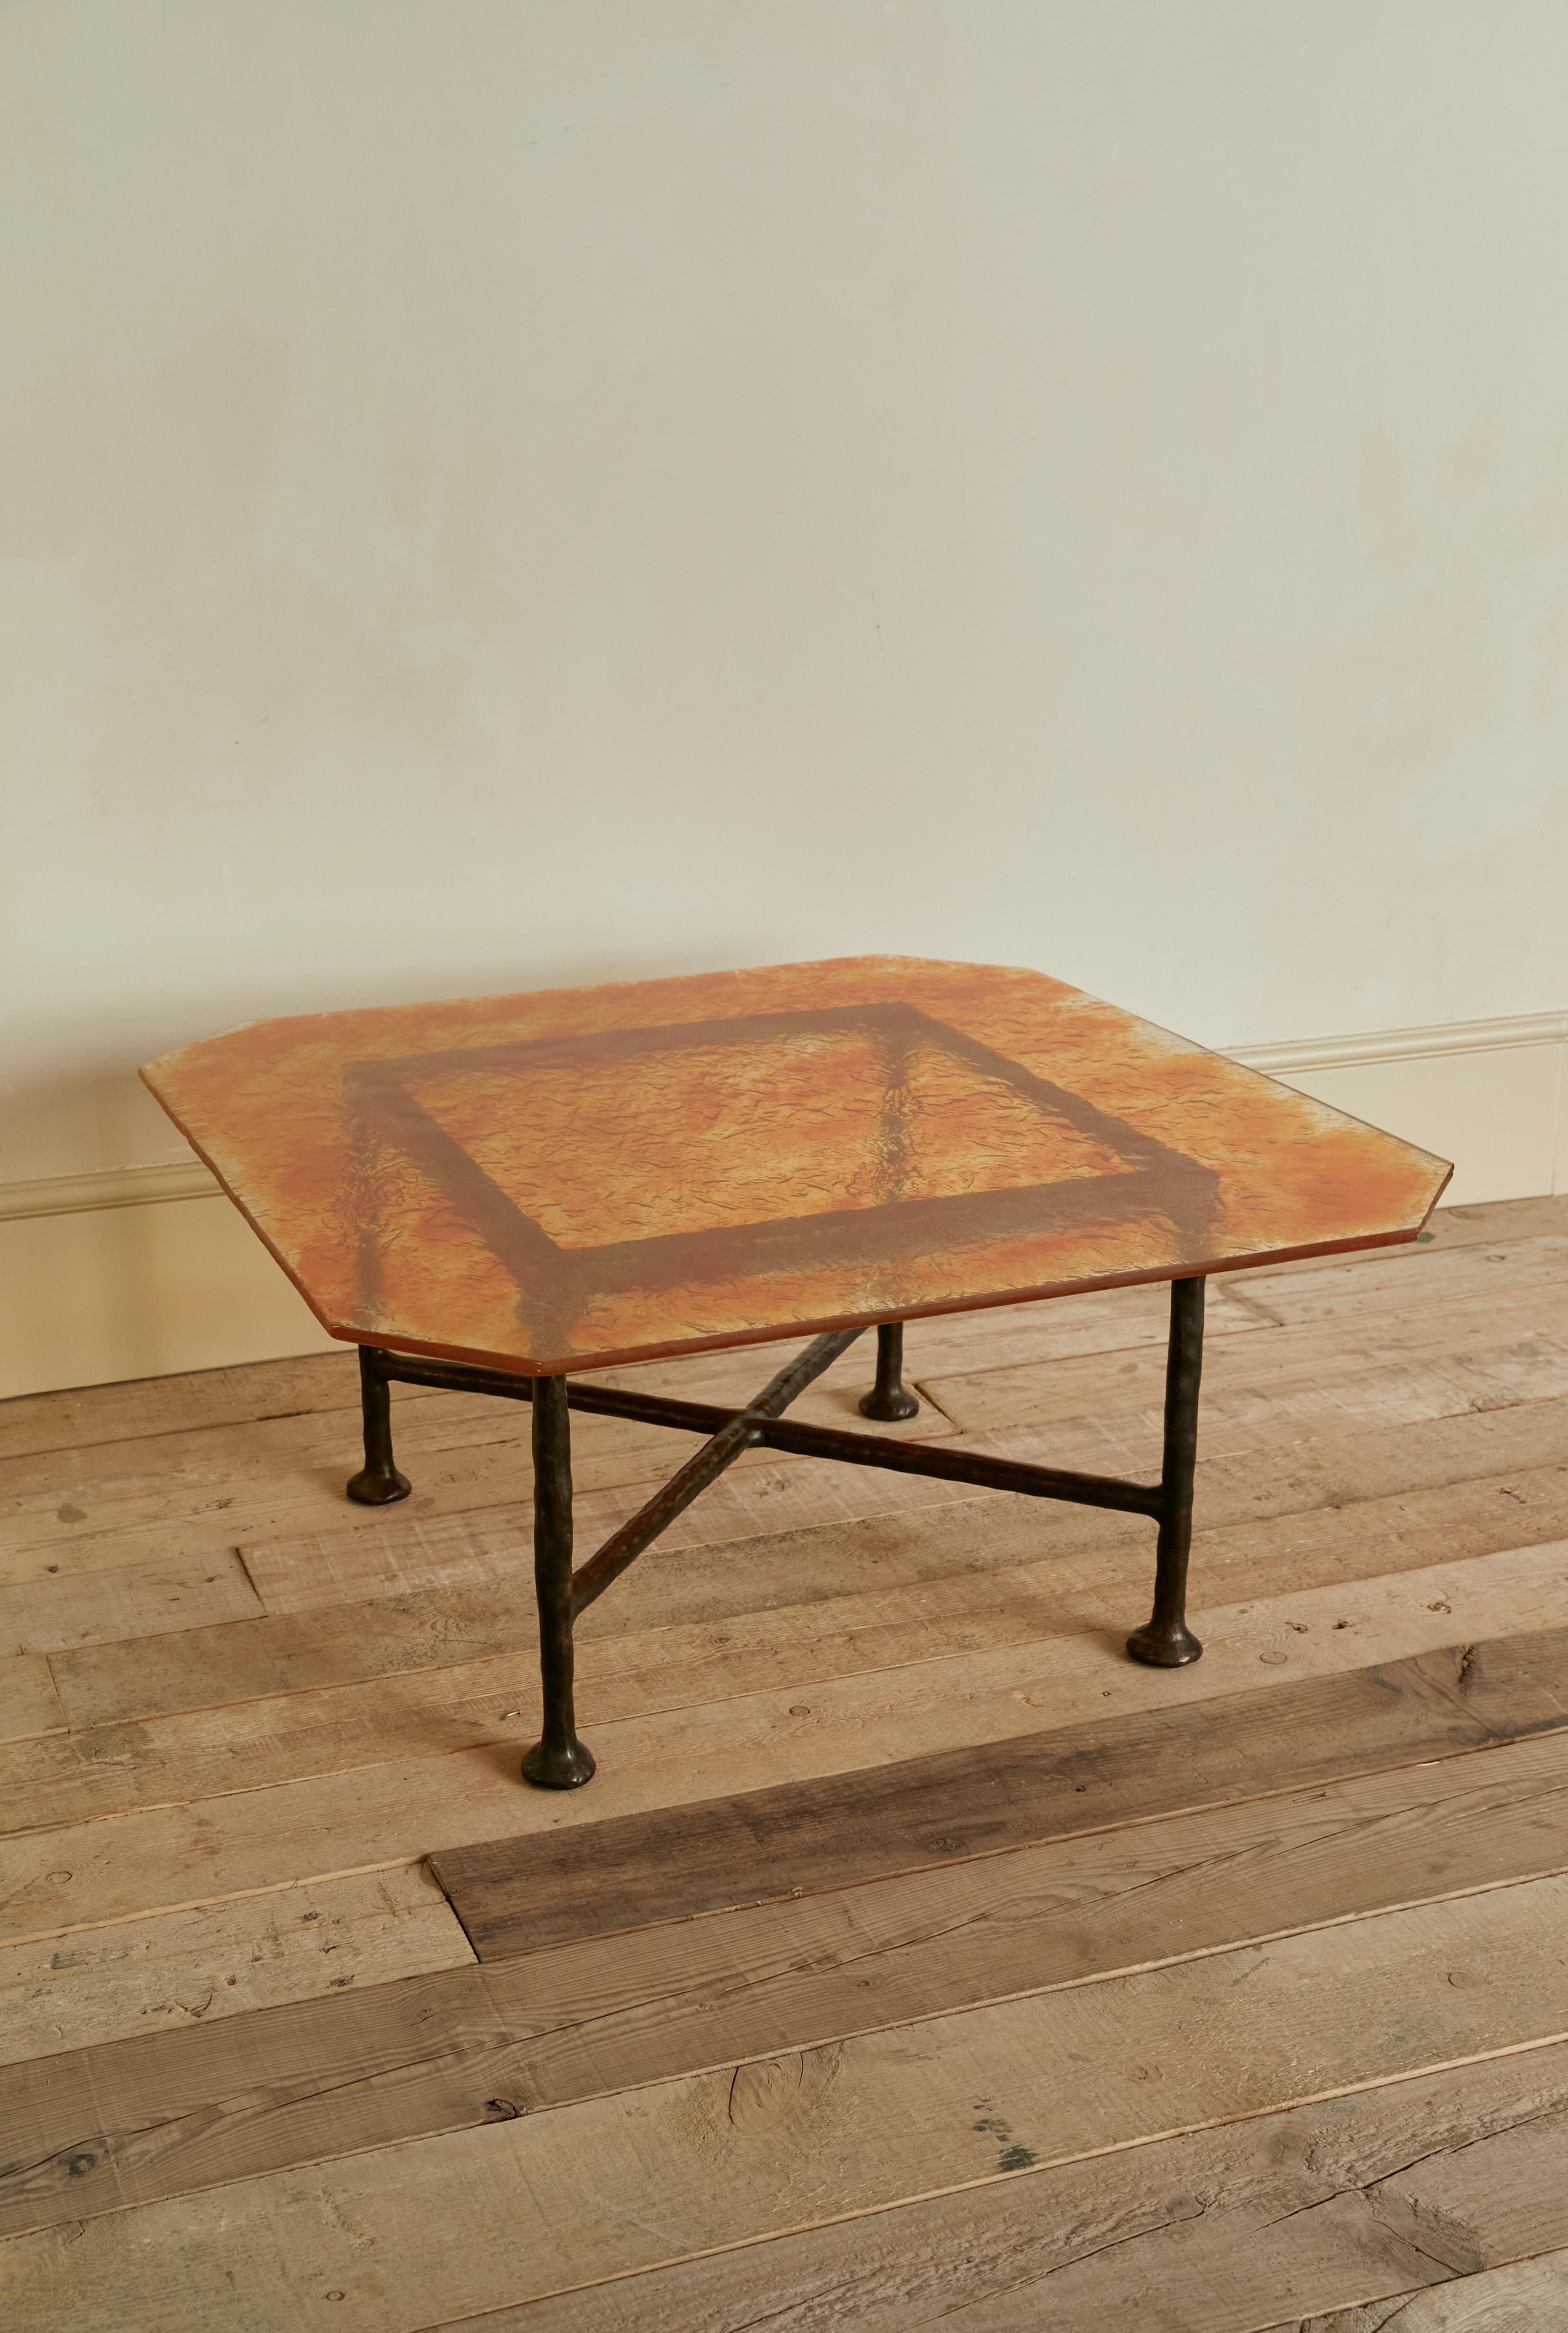 Bronze Pulver Iron table, bronze sculptured structure and handmade glass table top. For Sale